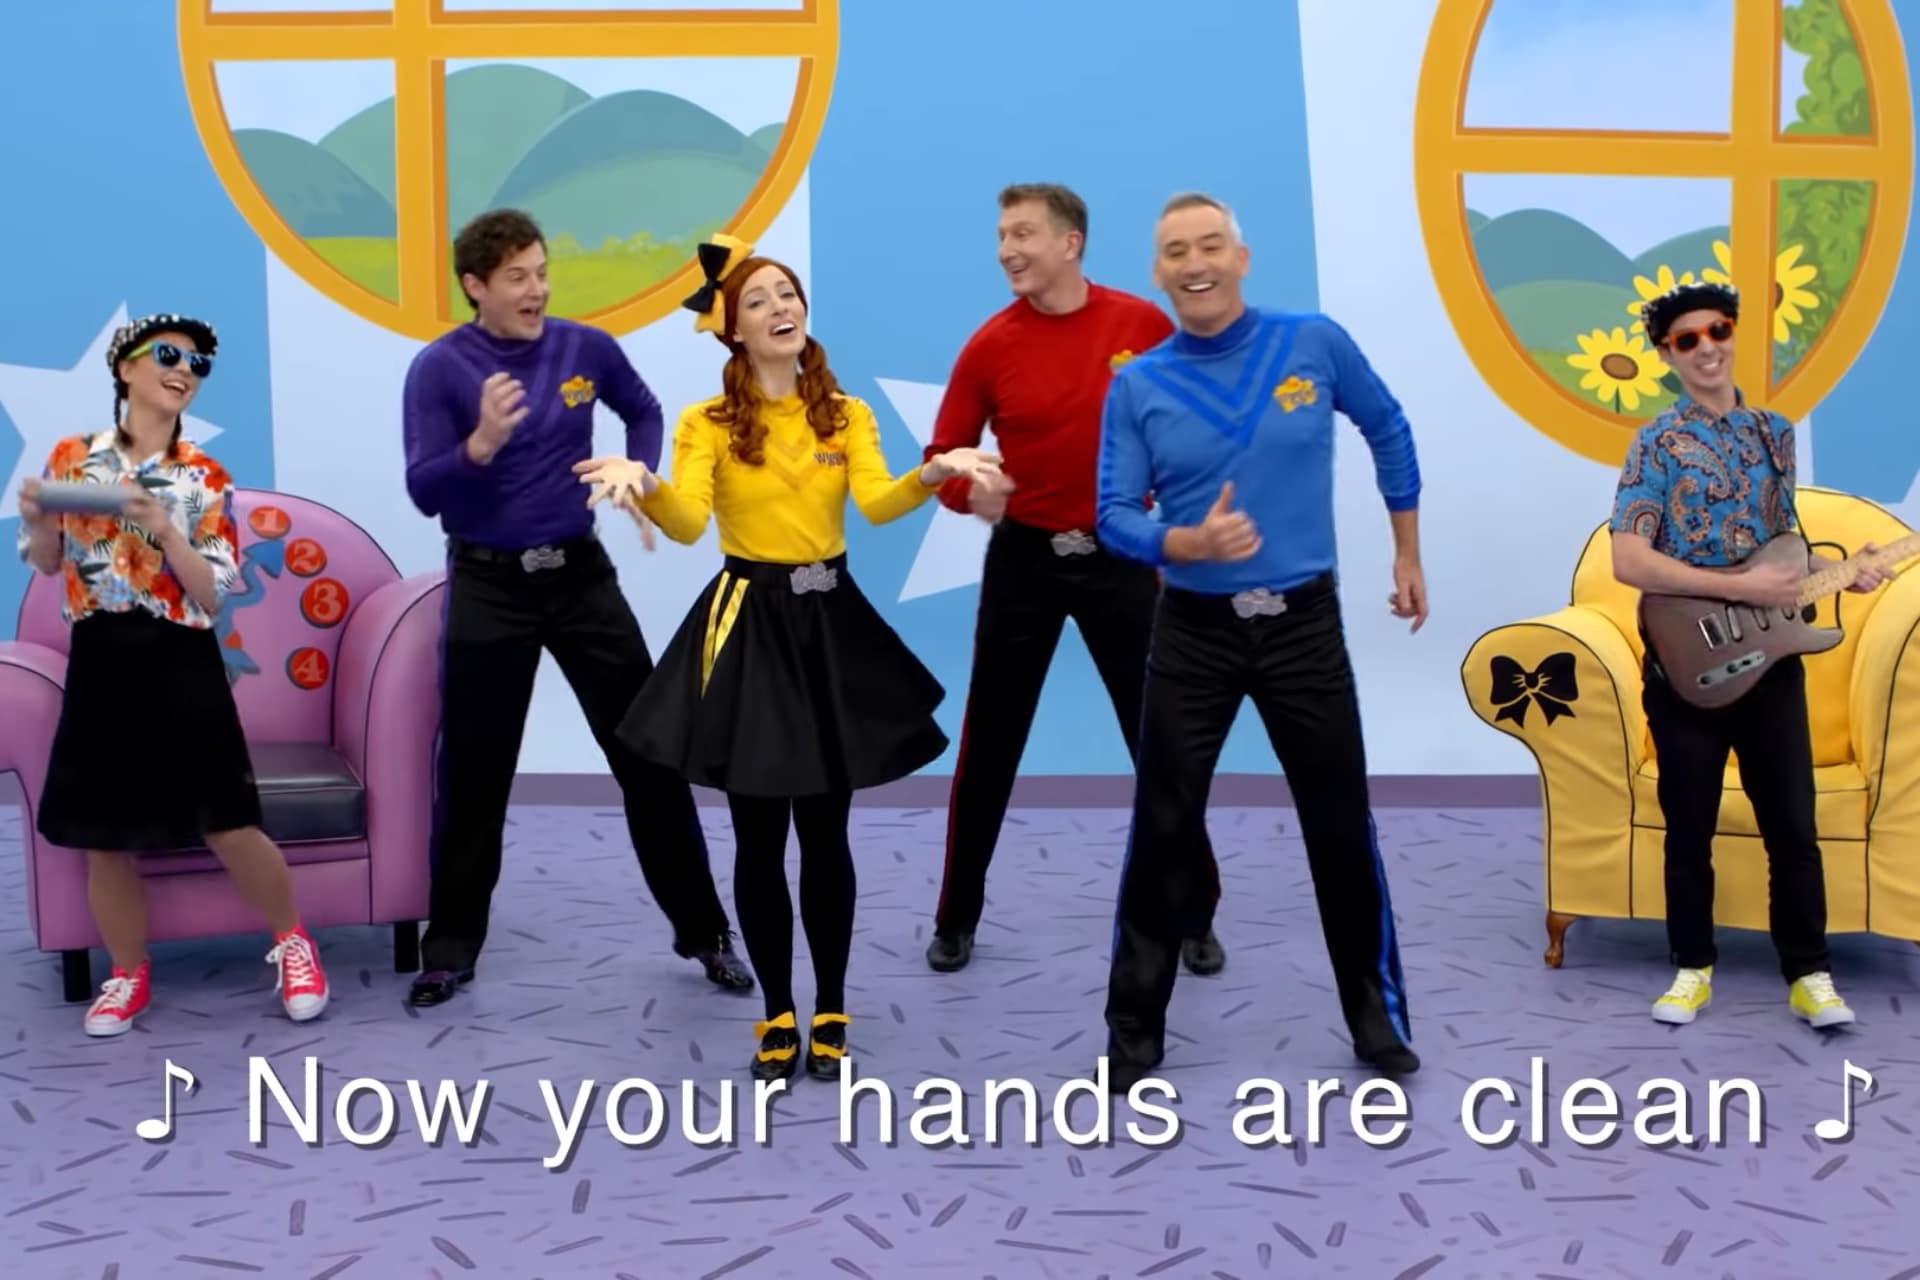 The wiggles performing a hand-washing dance